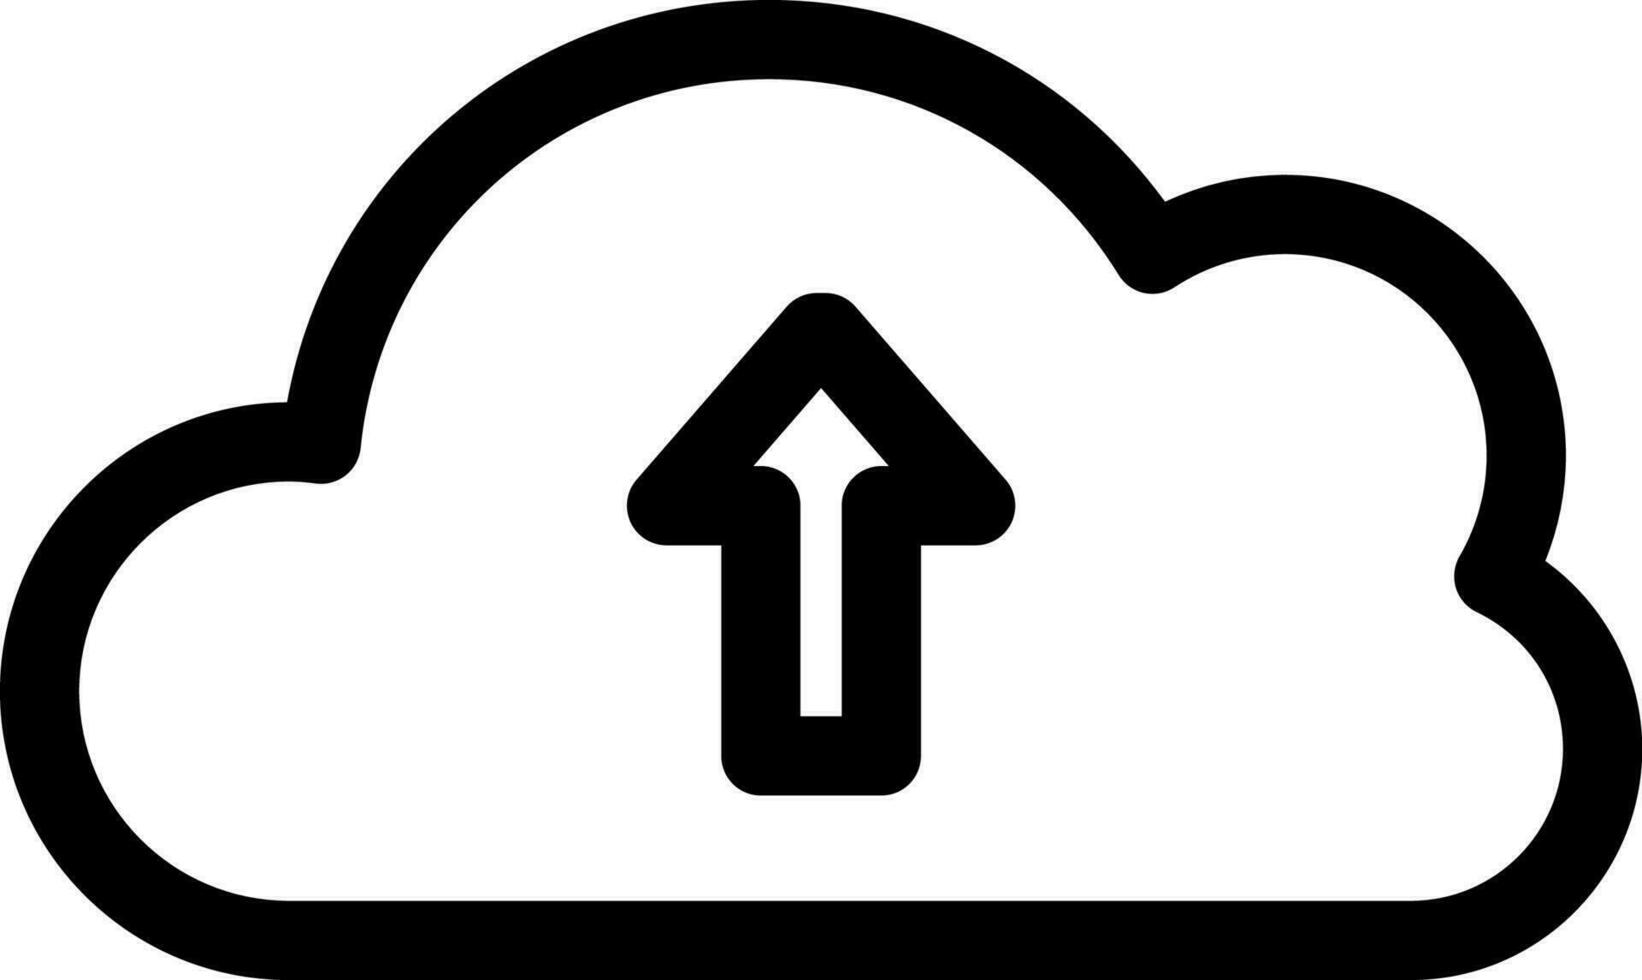 Cloud Upload icon in thin line art. vector